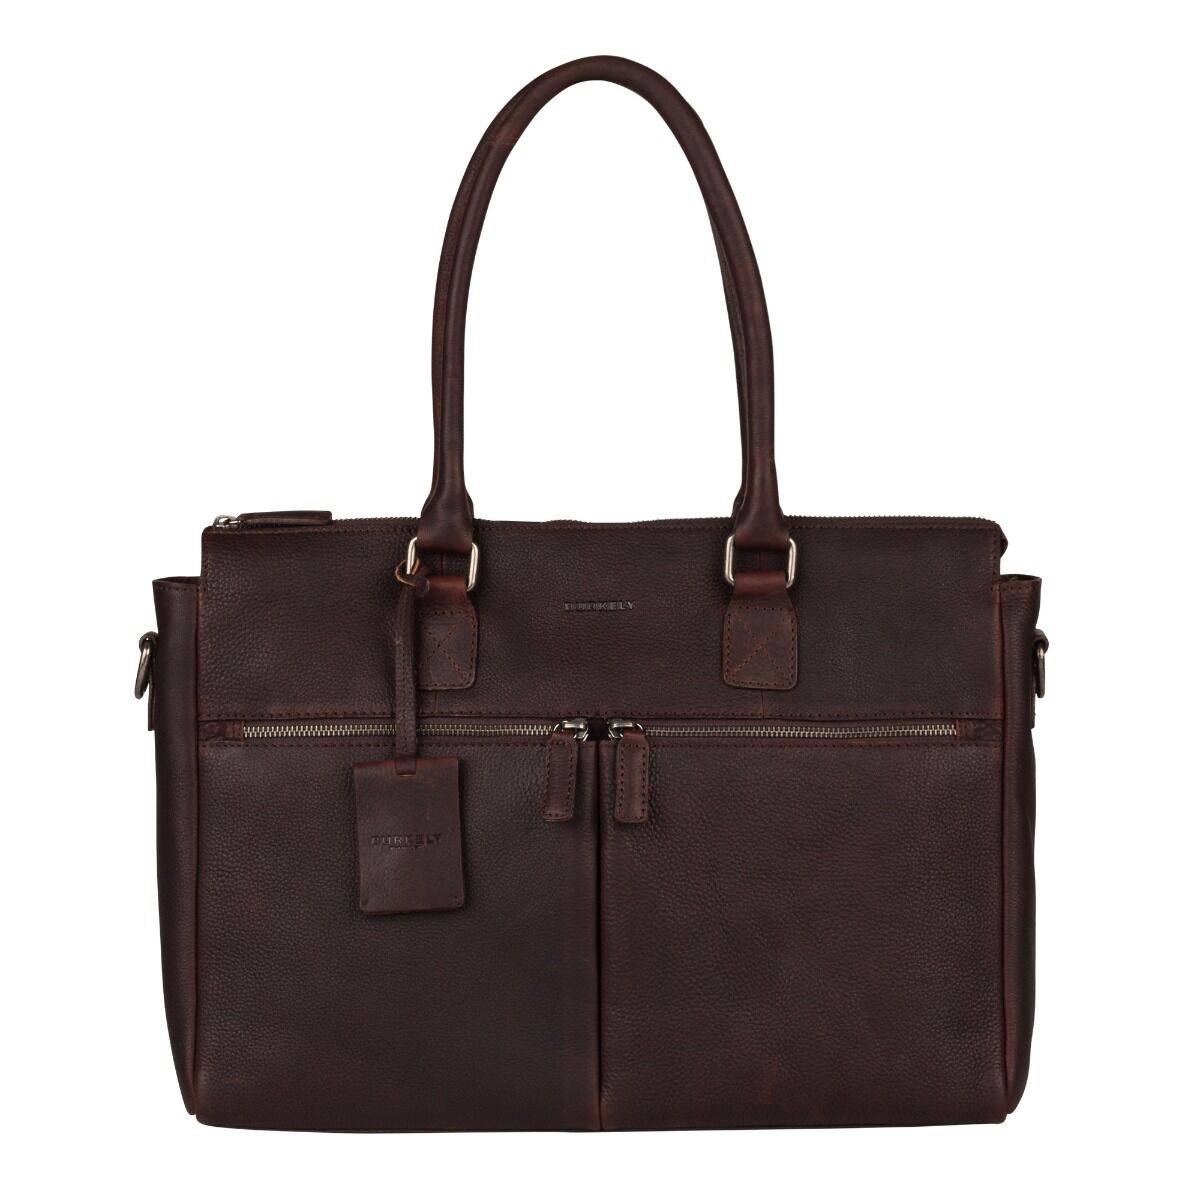 Burkely Antique Avery 15.6" laptop bag -Brown